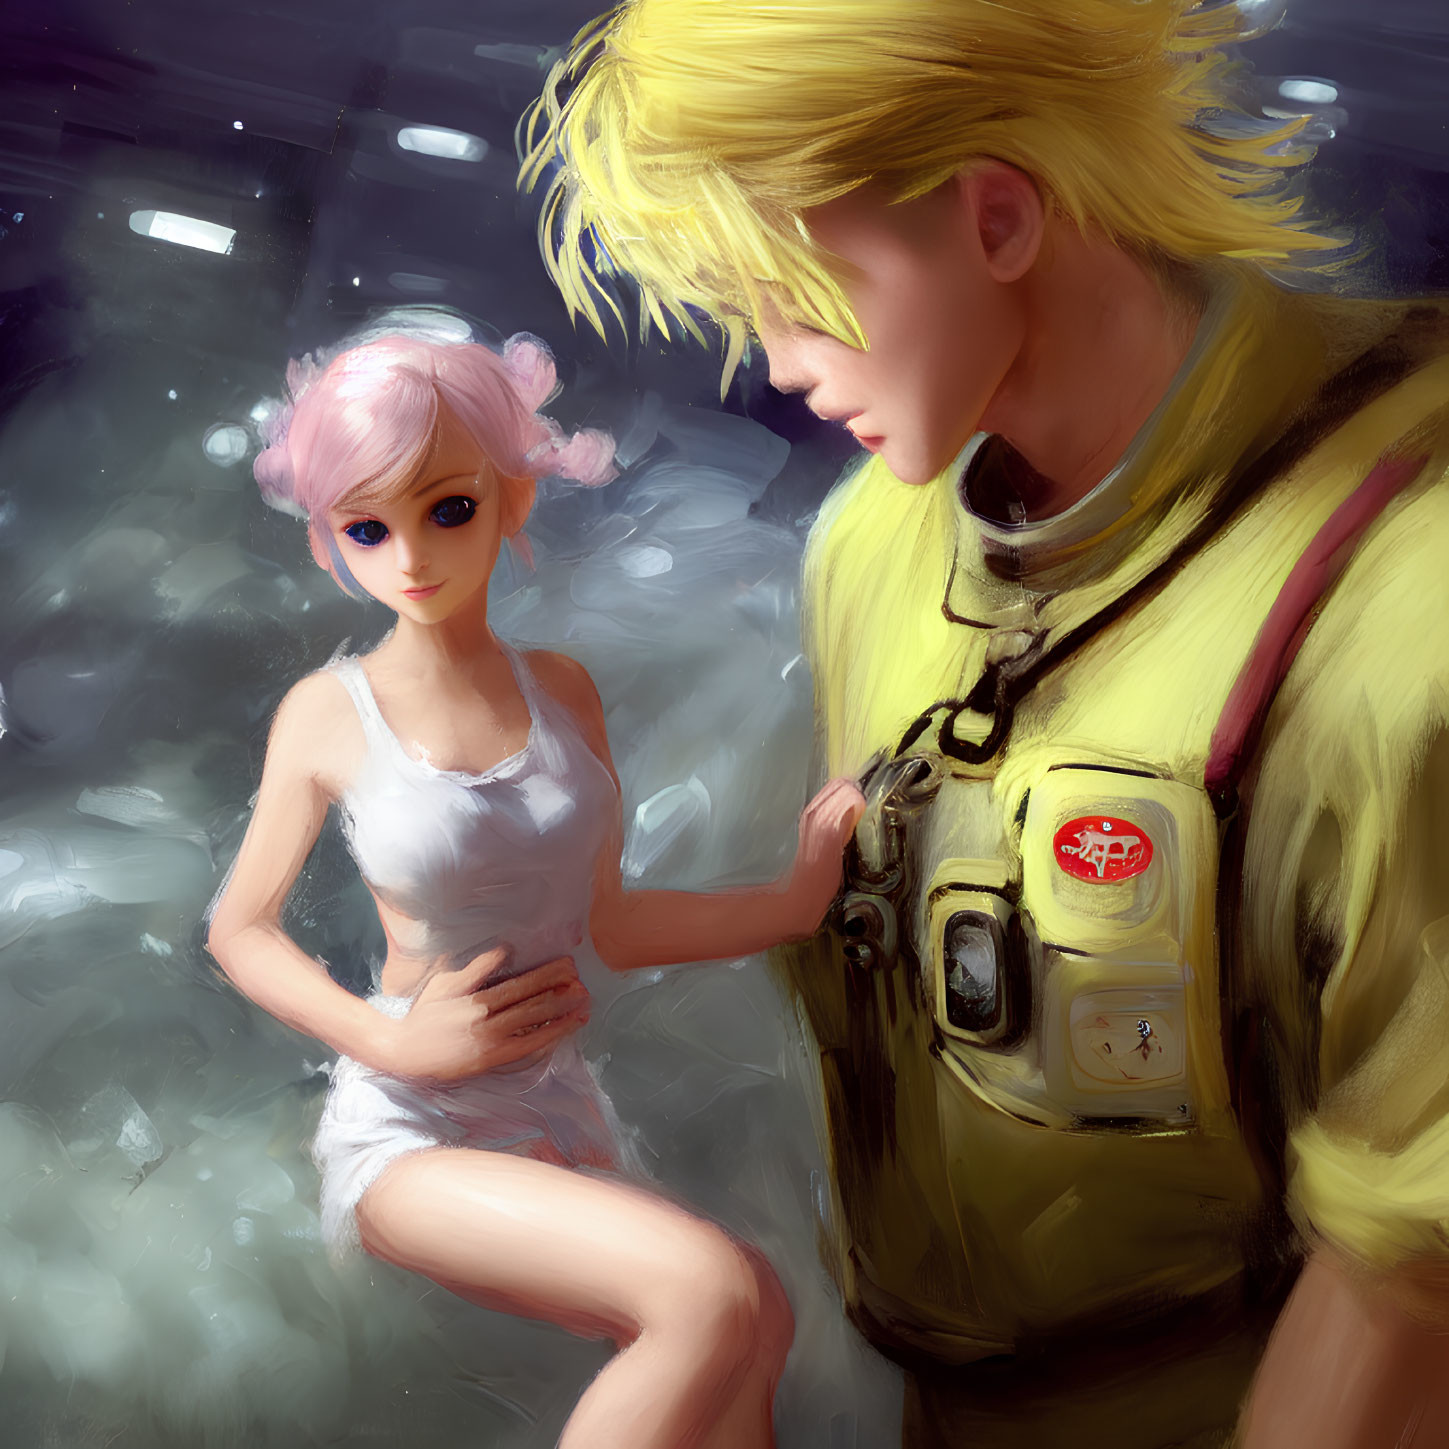 Pink-haired girl in white dress gazes at blond man in yellow jumpsuit with reflective light.